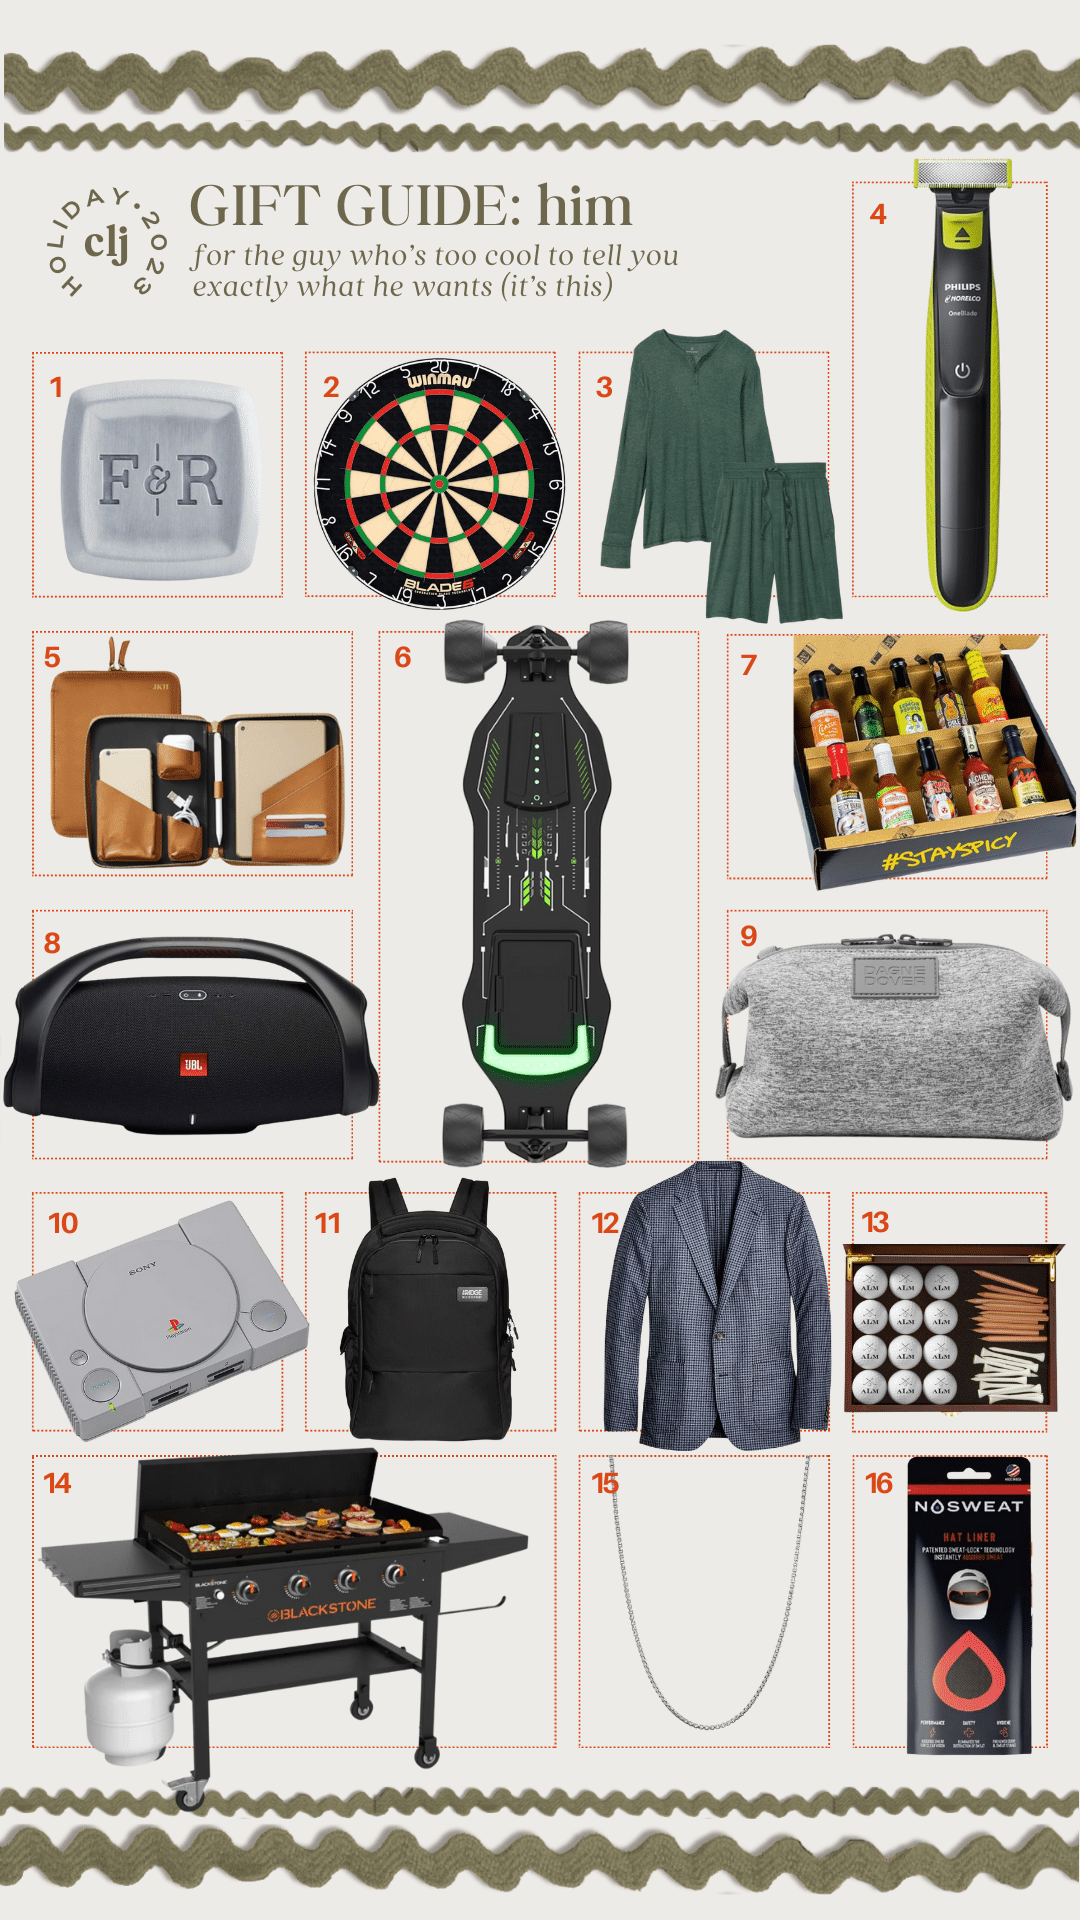 The 30 Best Gifts for Husband 2023 — Gifts Ideas for Men Who Run